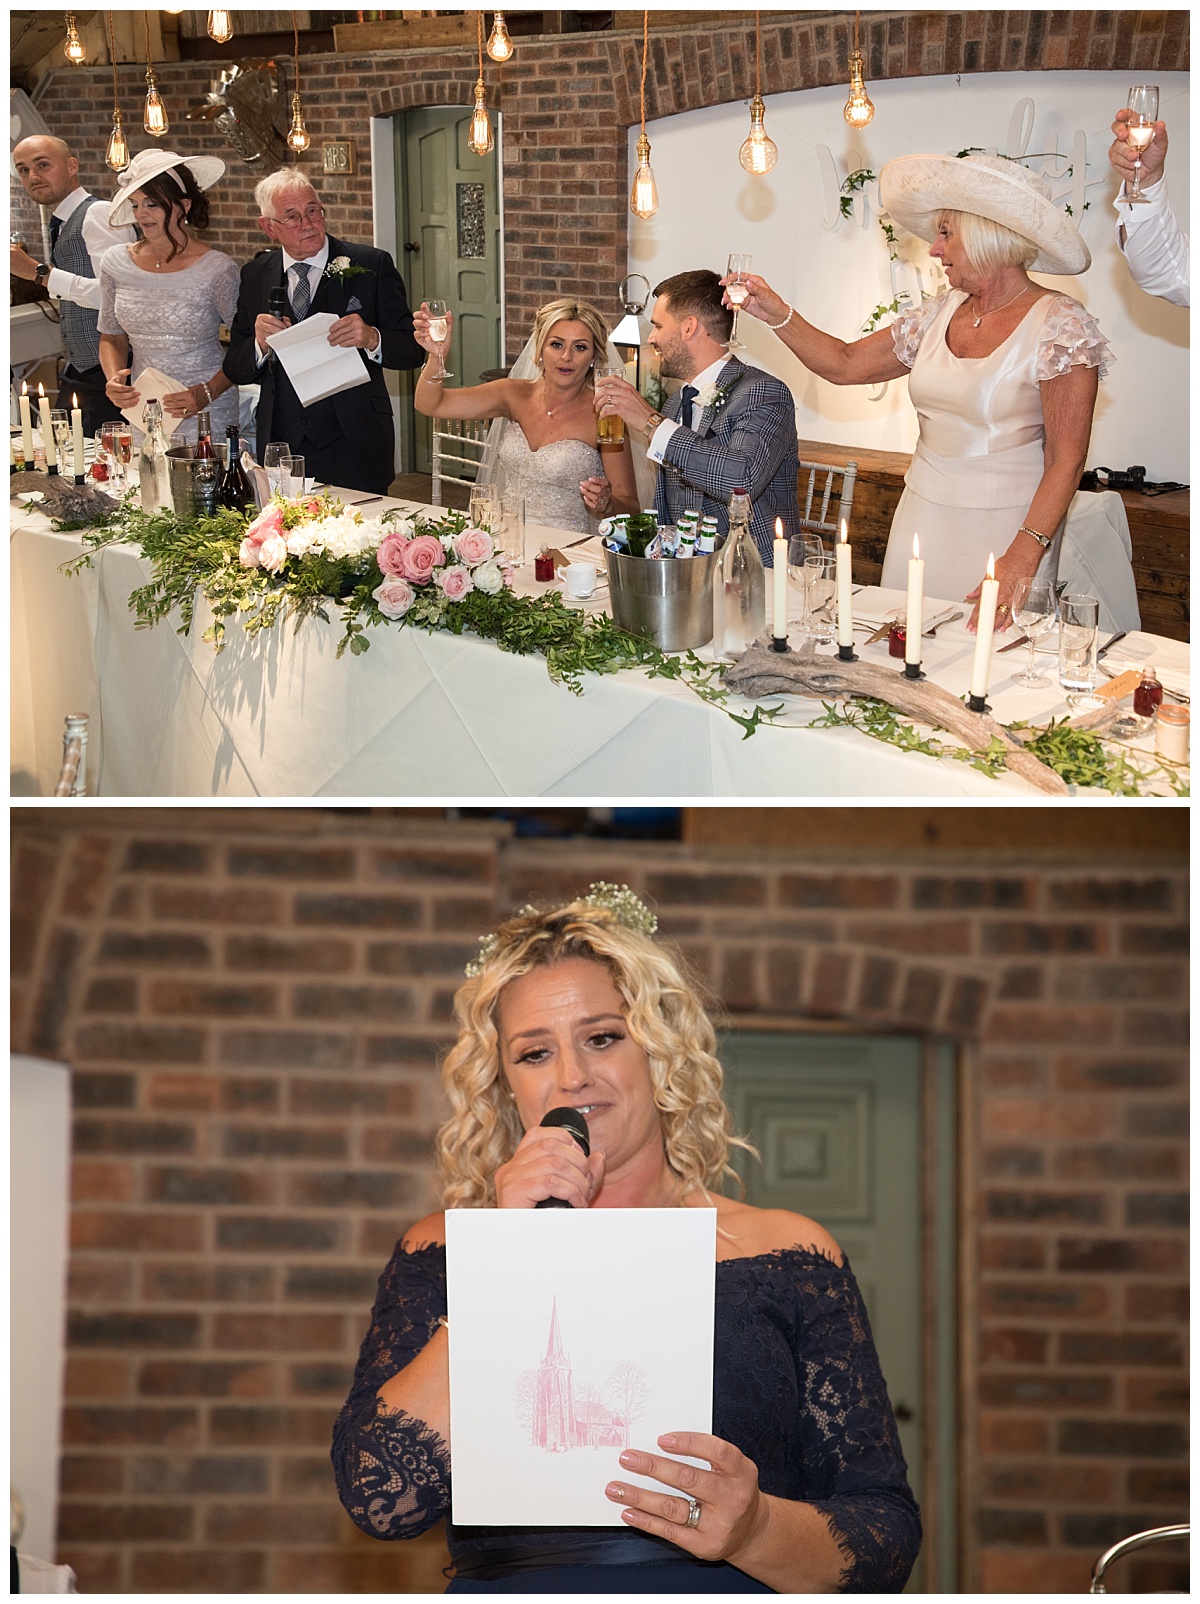 Wedding Photography Manchester - Brittany and Lee's Owen House Farm Wedding 81